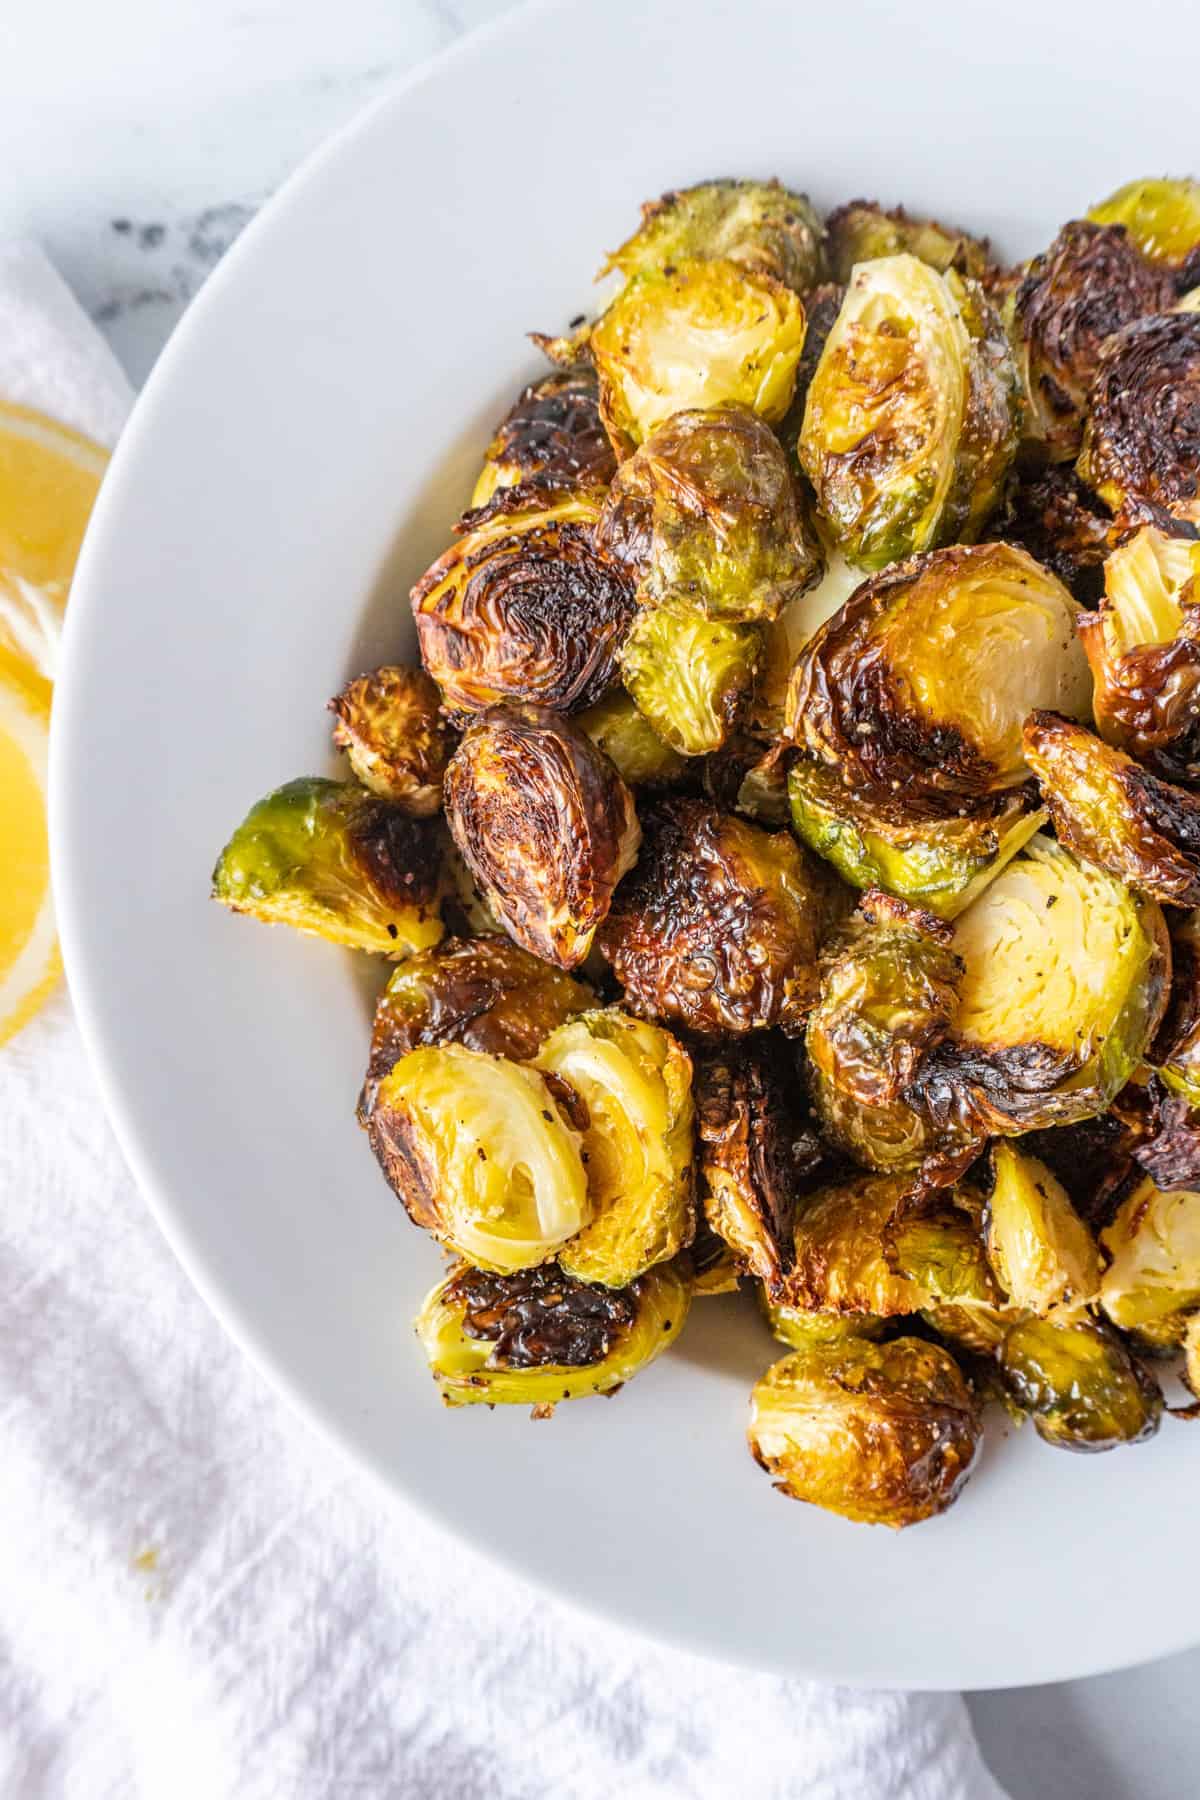 Oven Roasted Brussel Sprouts In a bowl